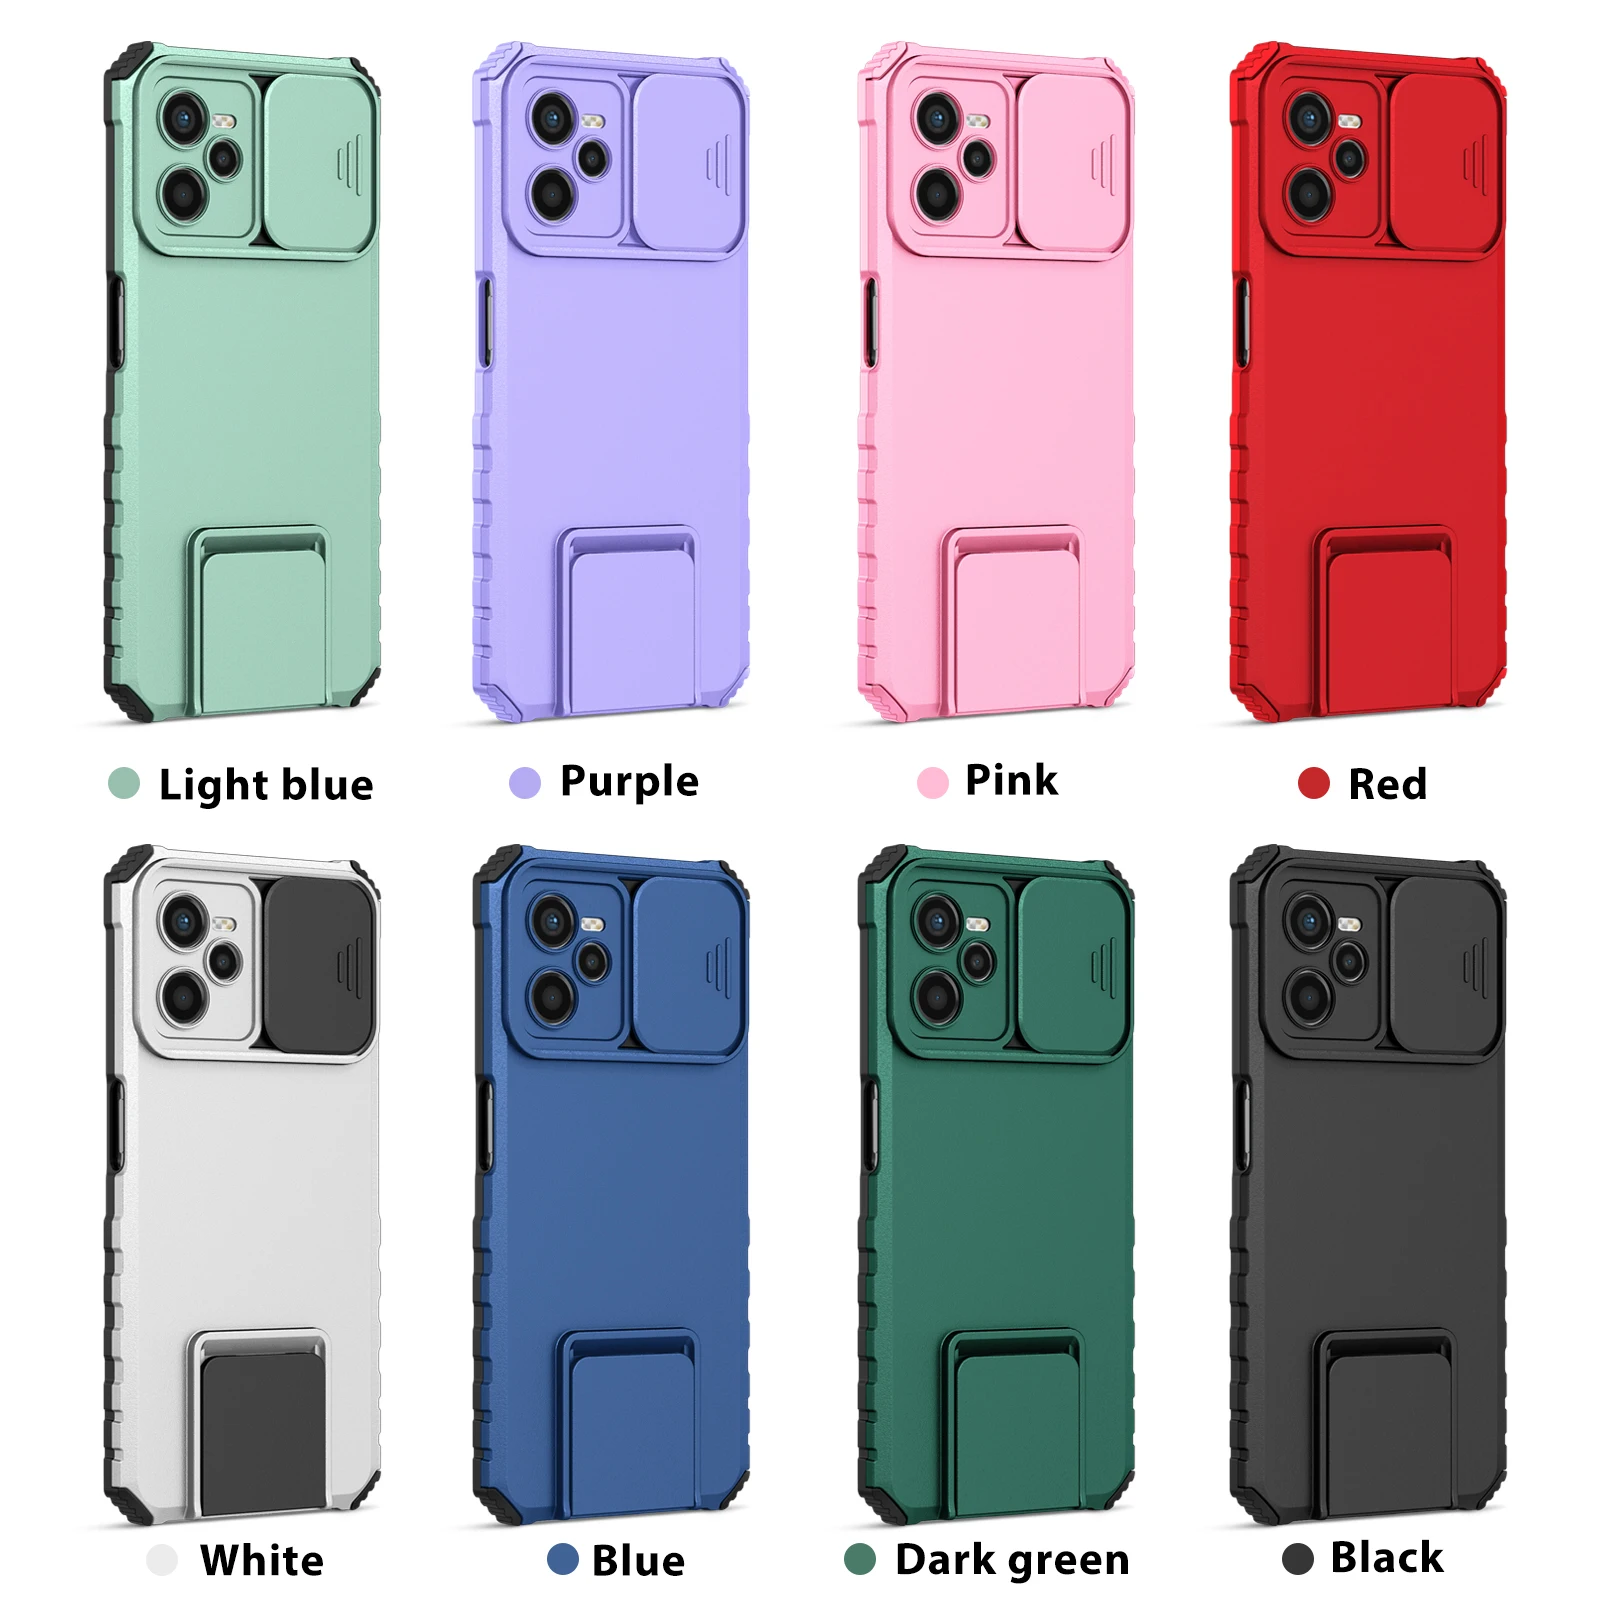 

Cute Slide Camera Stereo Stand Case for OPPO Realme 9i C21 C35 C31 C17 C25 C12 C20 C11 C15 5i 7i Reno 6 Lite 5 Shockproof Cover